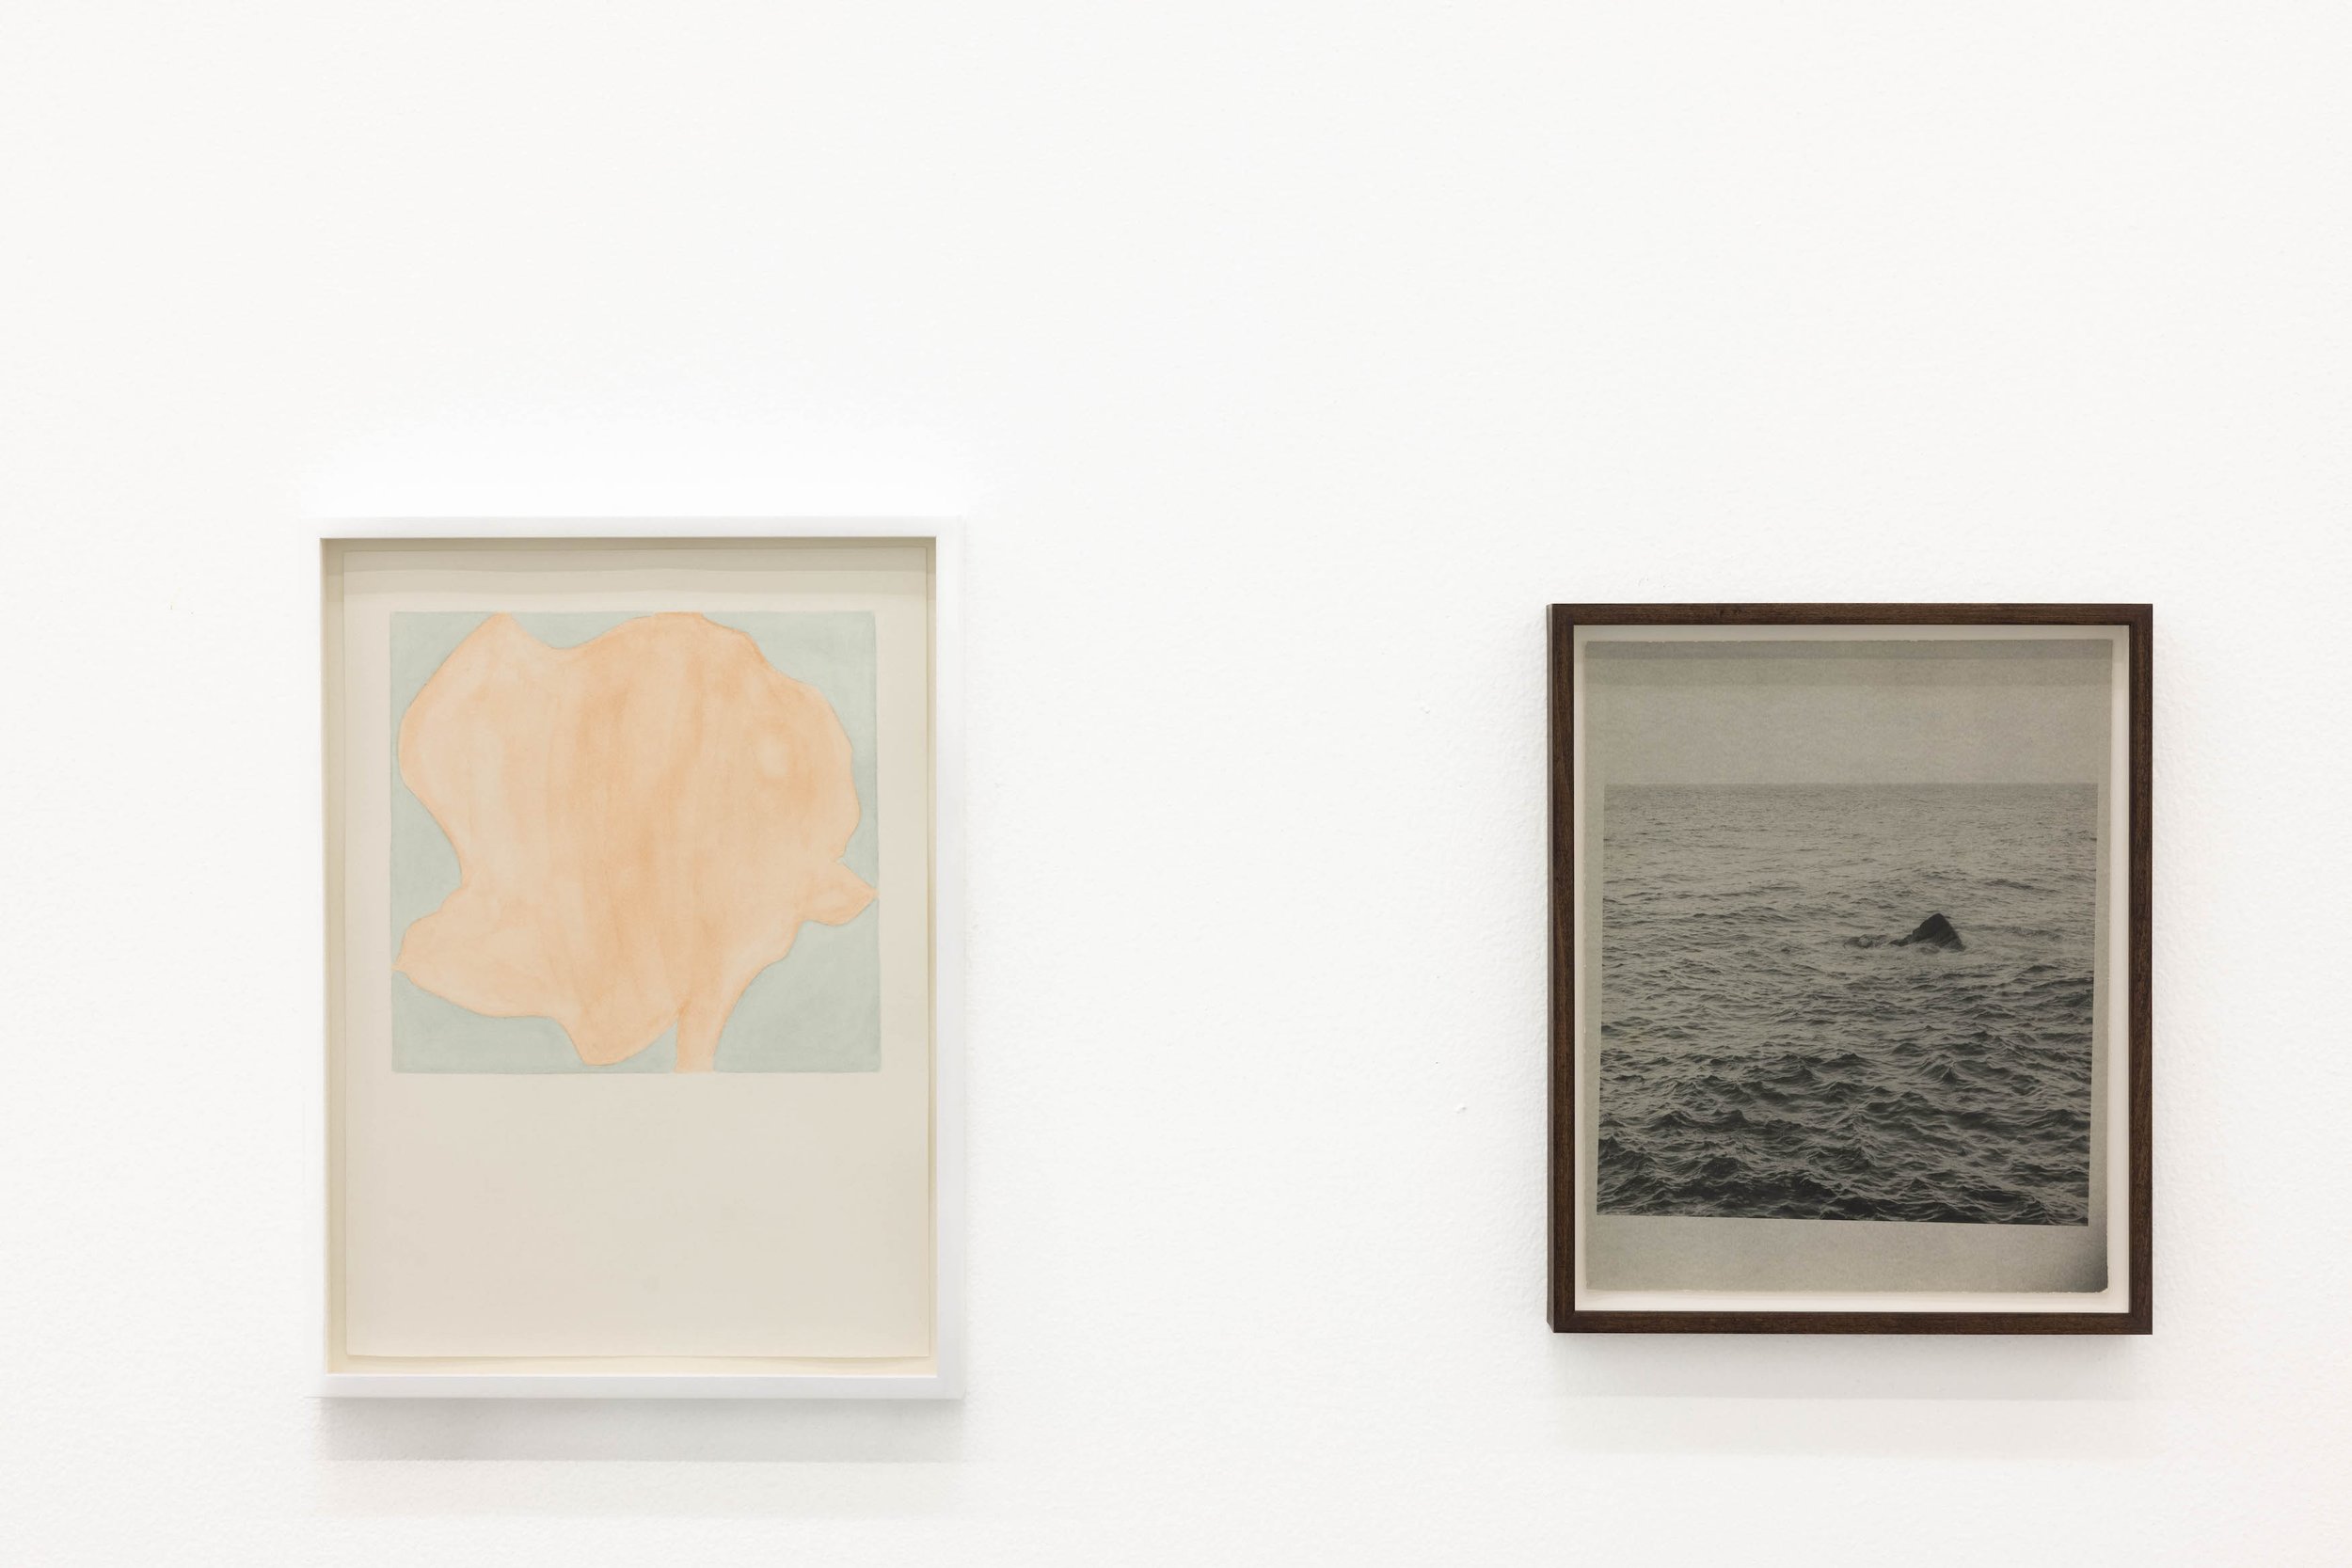  L – R  Depths of green, 2021, watercolour on paper, 26 x 36 cm / 39 x 29 cm (framed) / Faux raccord II, 2014, black and white analogue photograph on baryté paper, 29 x 23 cm / 32 x 26 cm (framed) 